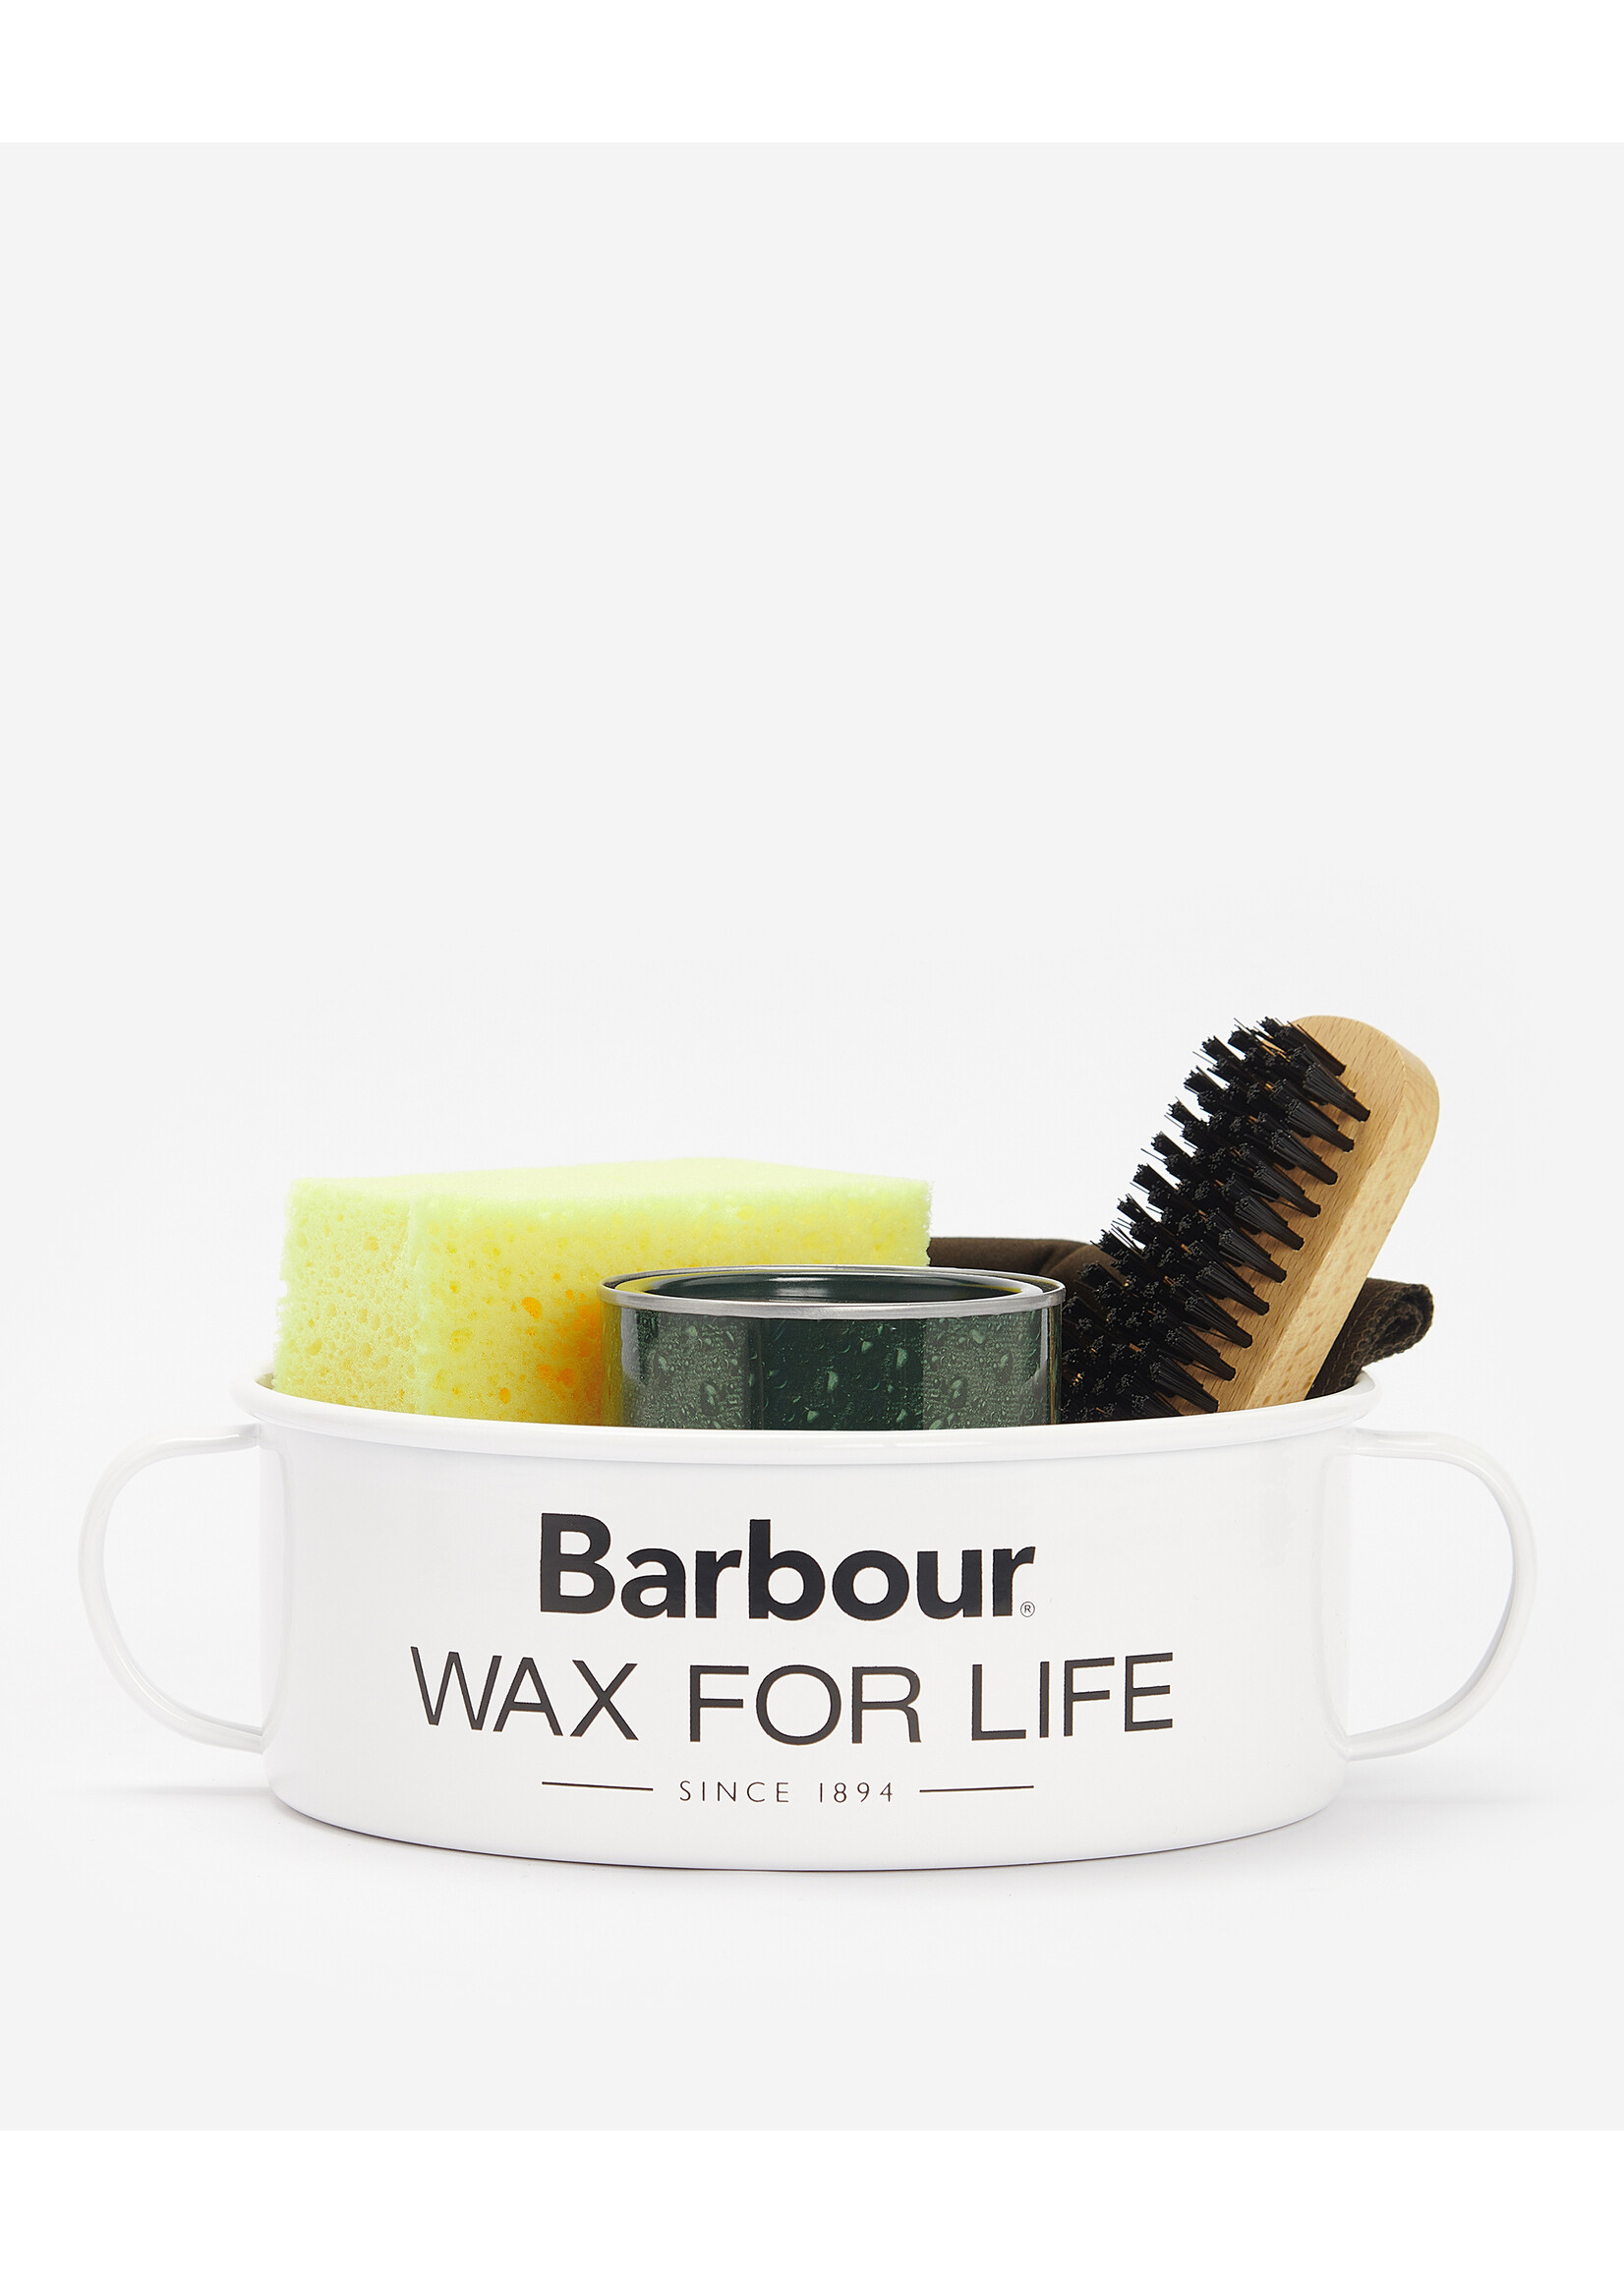 Barbour LUXURY RE-WAXCARE KIT